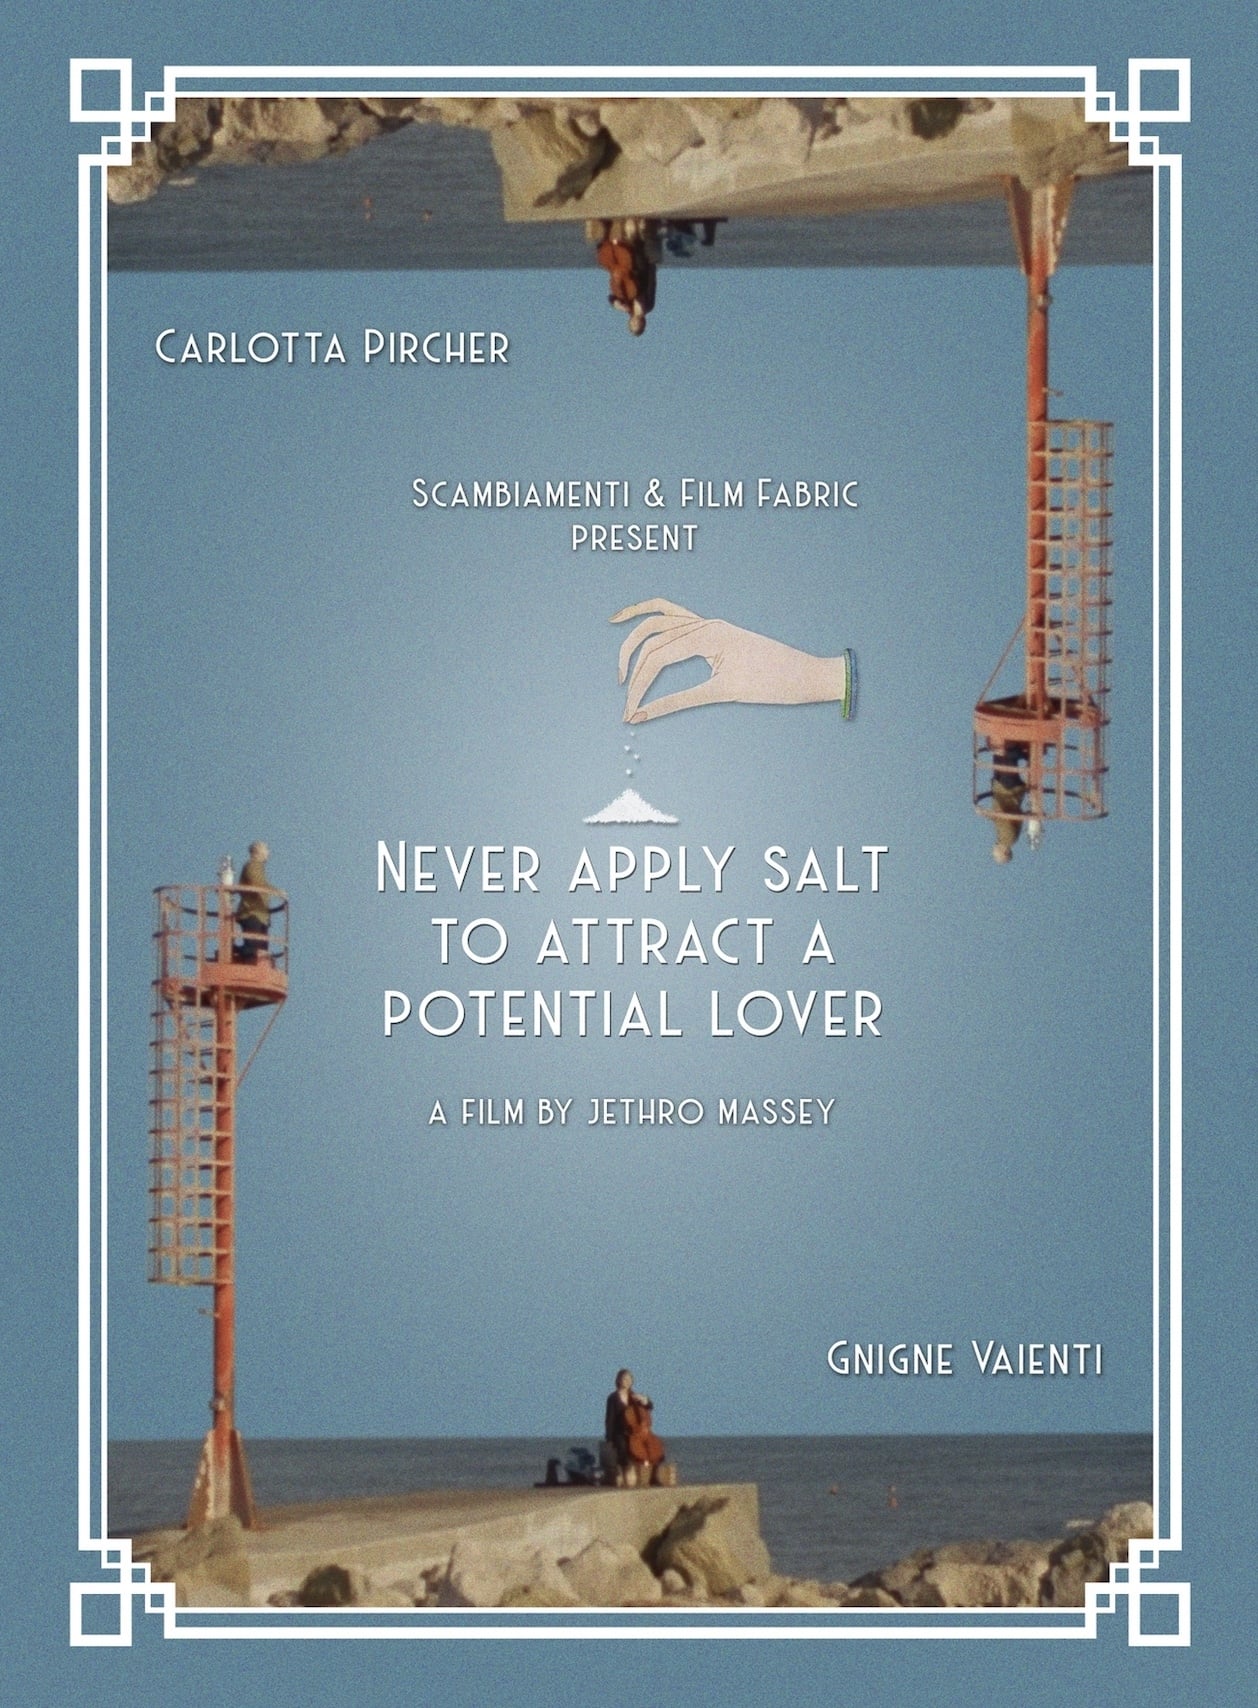 Never apply salt to attract a potential lover